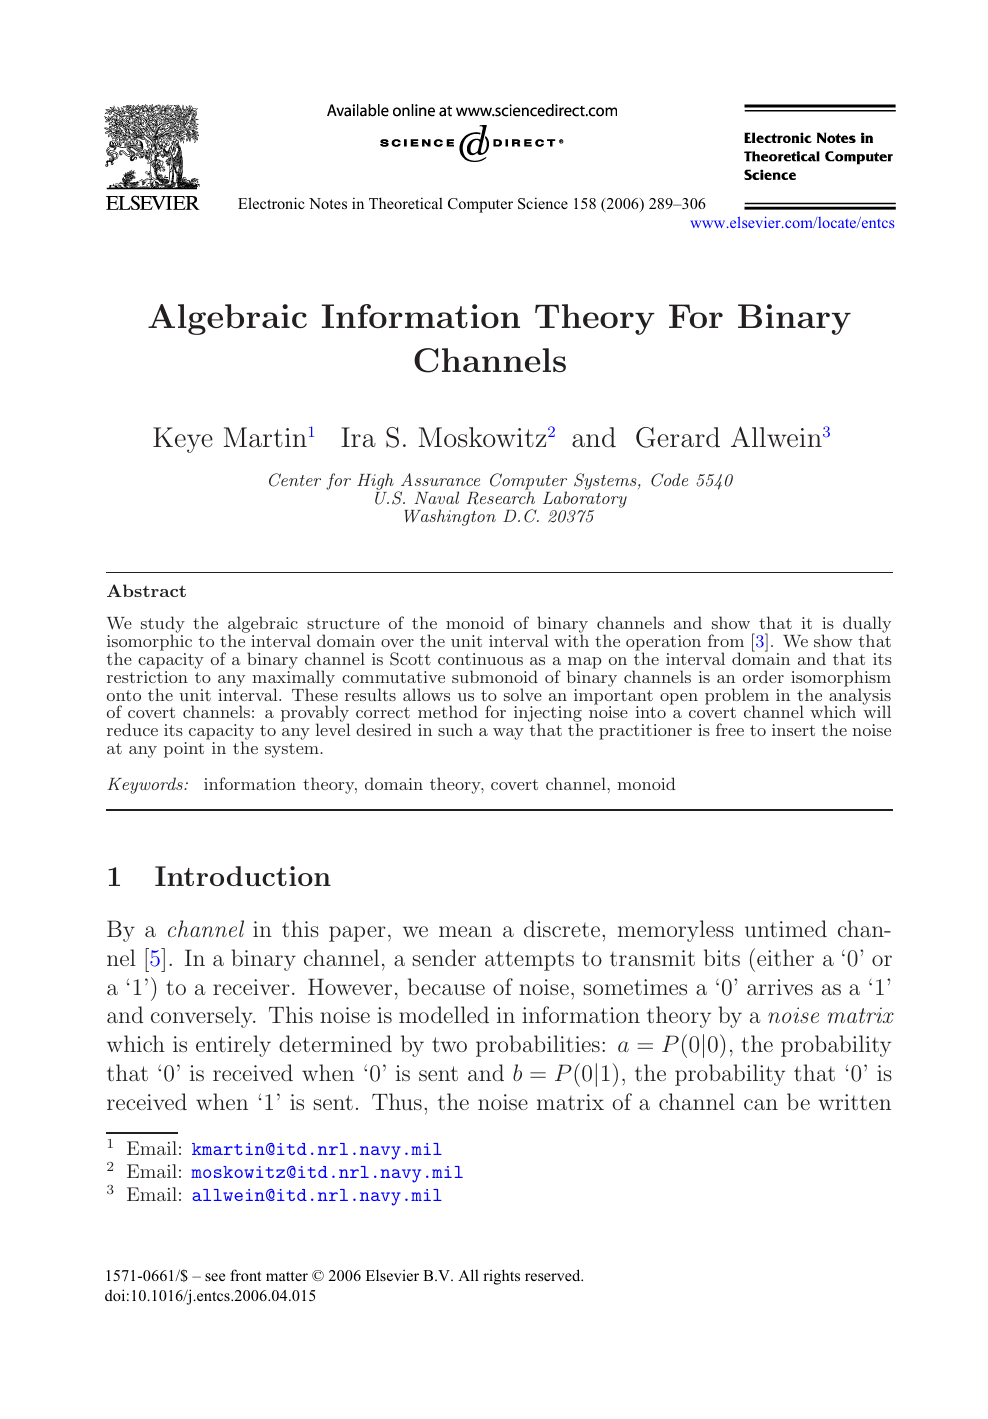 Algebraic Information Theory For Binary Channels Topic Of Research Paper In Computer And Information Sciences Download Scholarly Article Pdf And Read For Free On Cyberleninka Open Science Hub